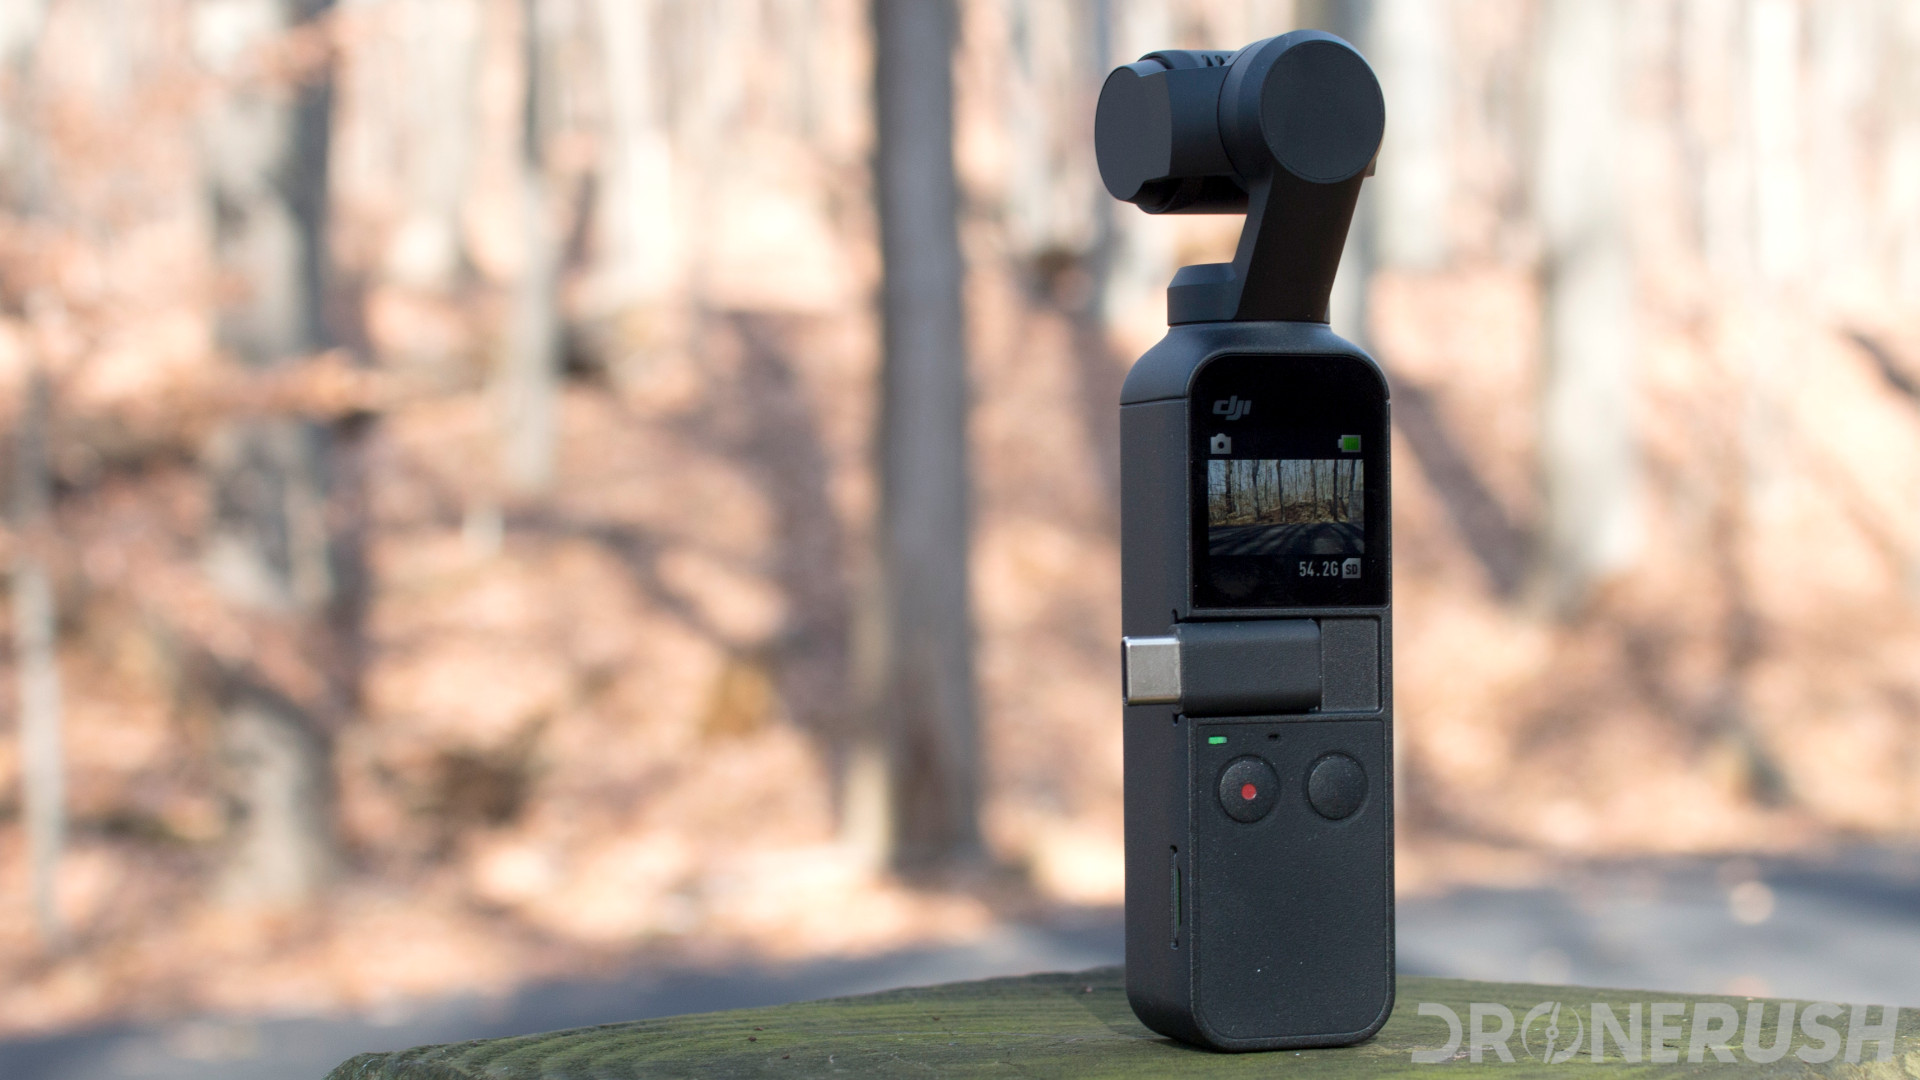 The DJI Osmo Pocket photographed in a forest.